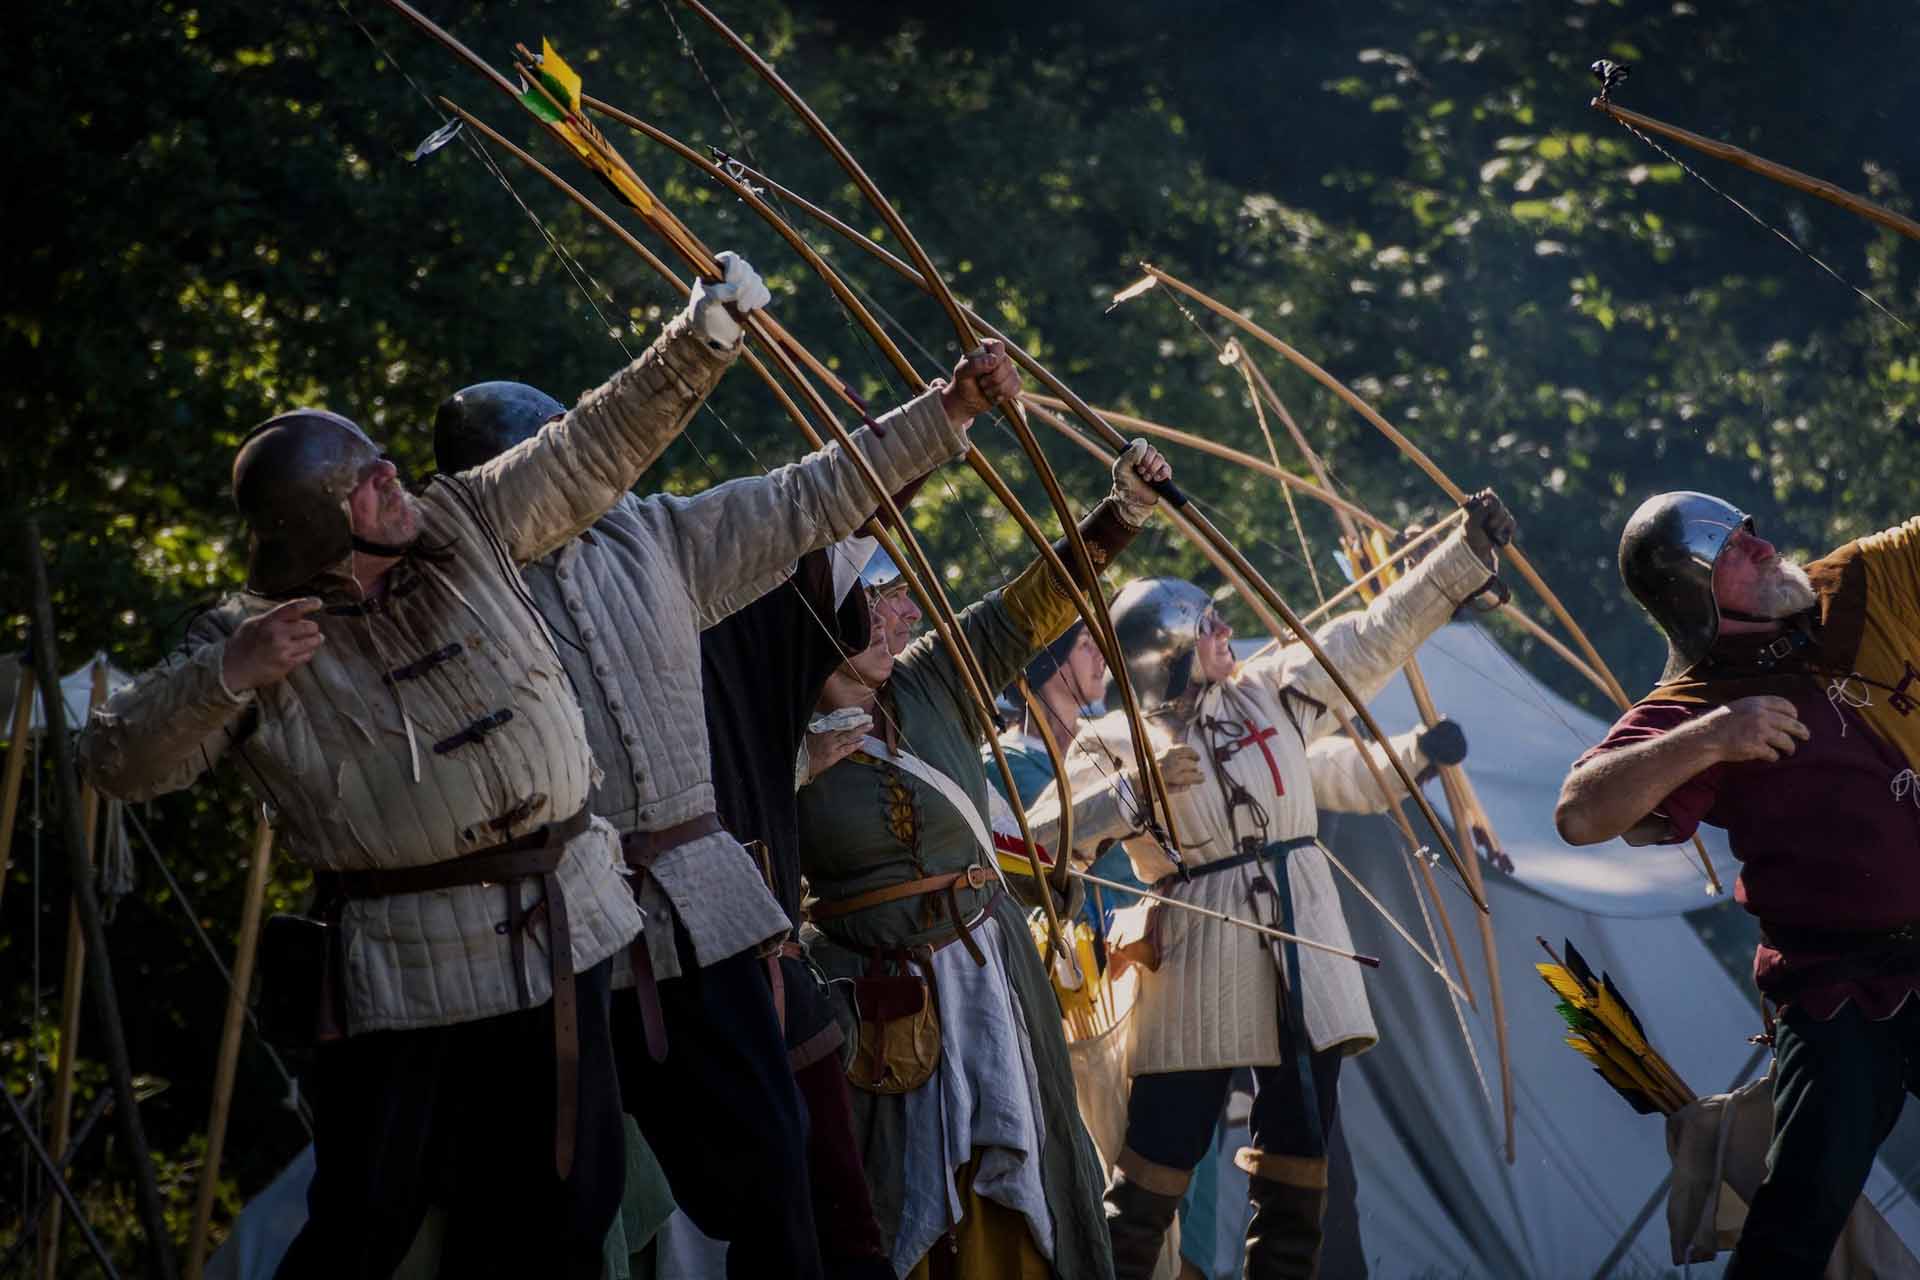 Archers take aim at the Loxwood Joust Festival